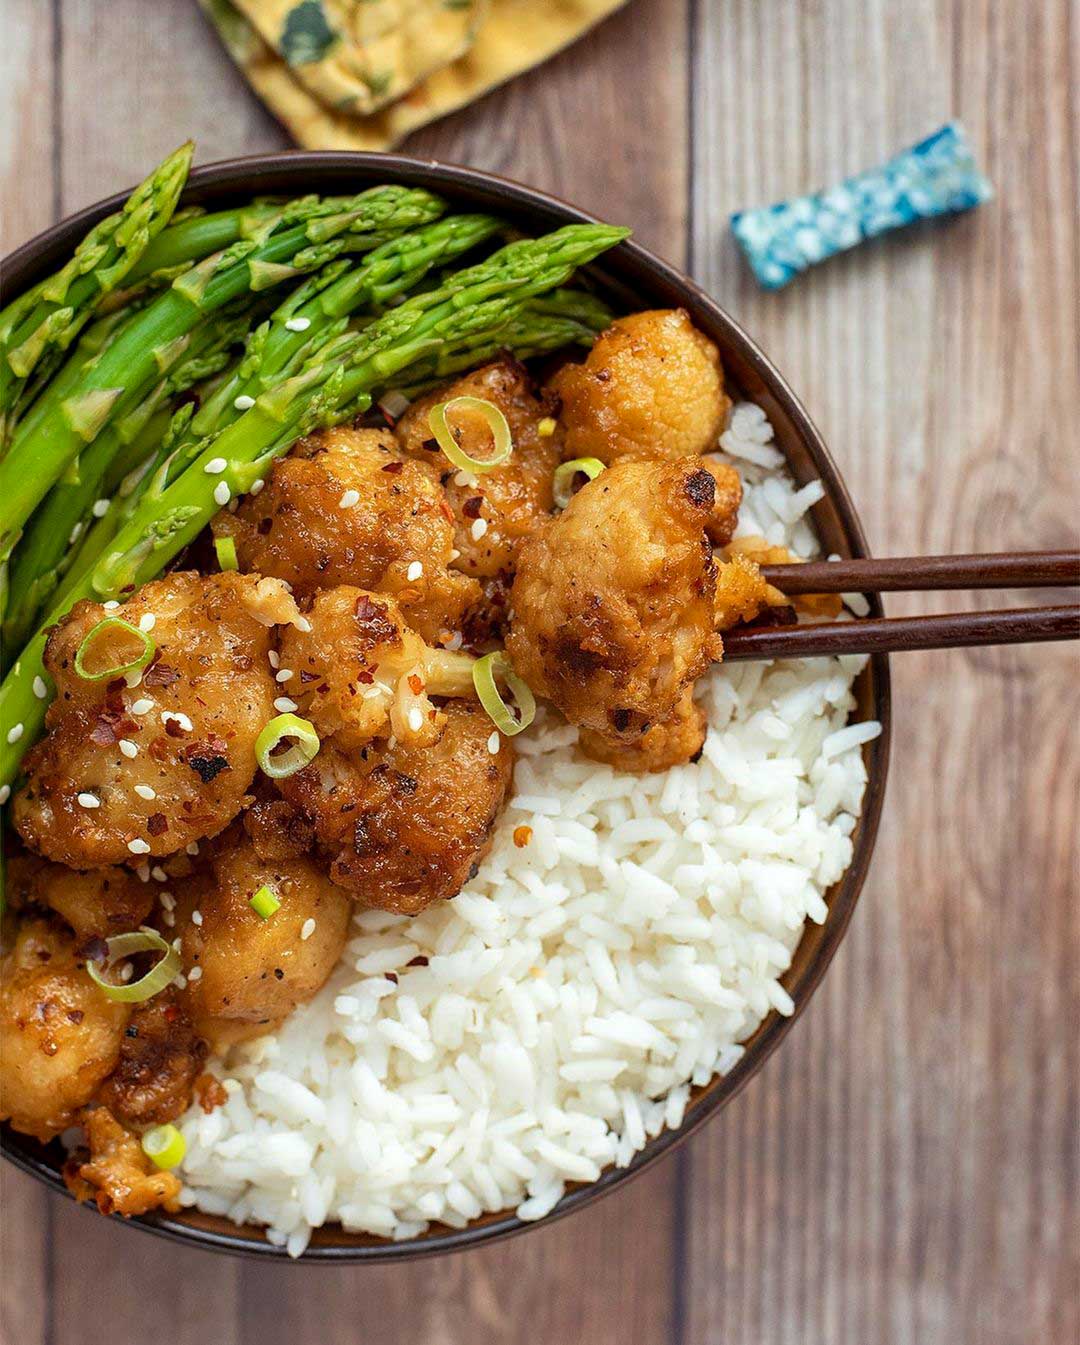 Orange Cauliflower with Steamed Asparagus recipe served in a bowl with chopsticks.